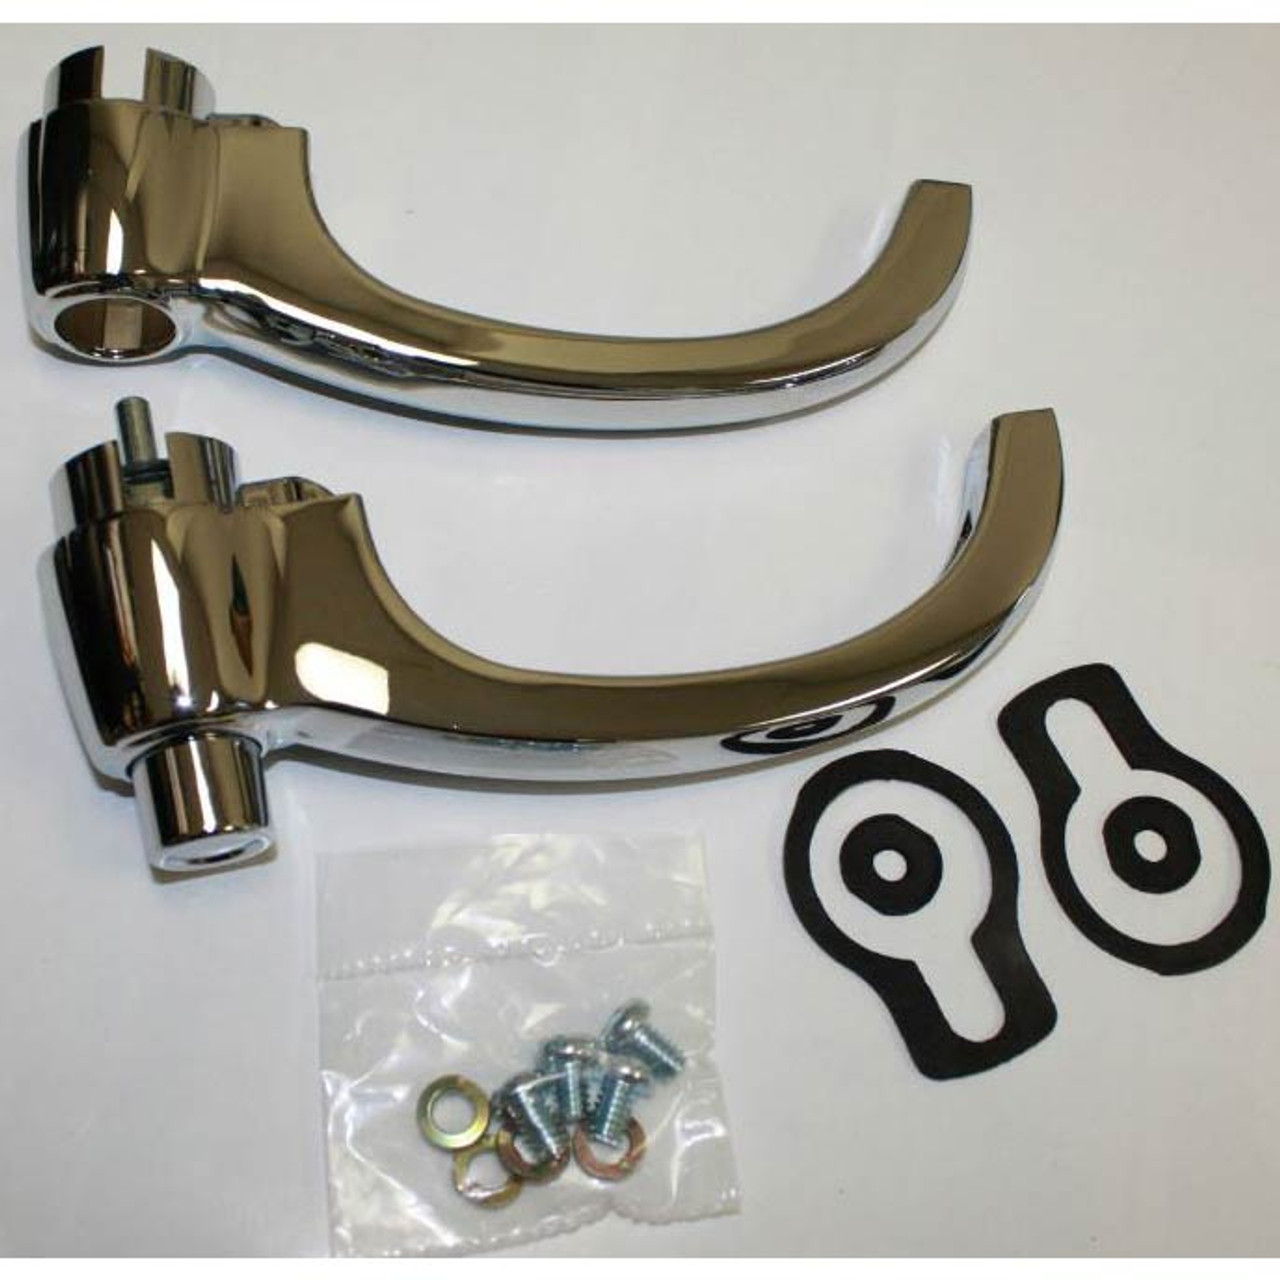 1952-1959 Chevy/GMC Truck Exterior Door Handles Chrome With Gaskets & Hardware. Pair